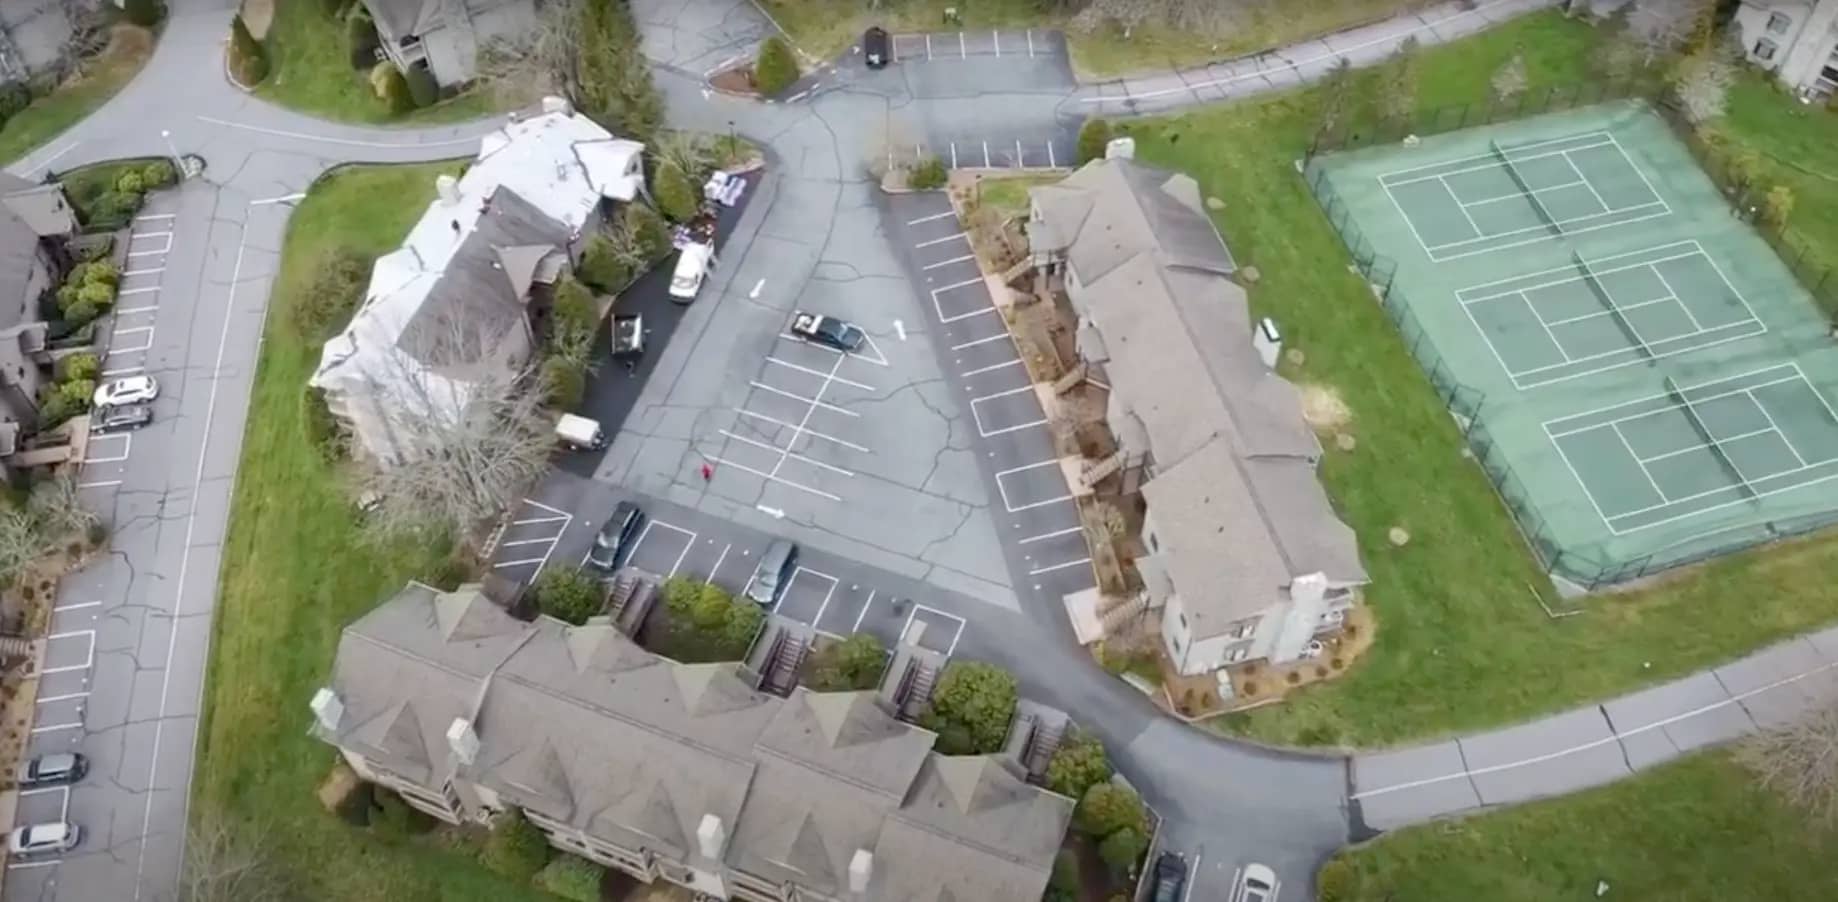 drone footage of townhouse neighborhood with tennis courts